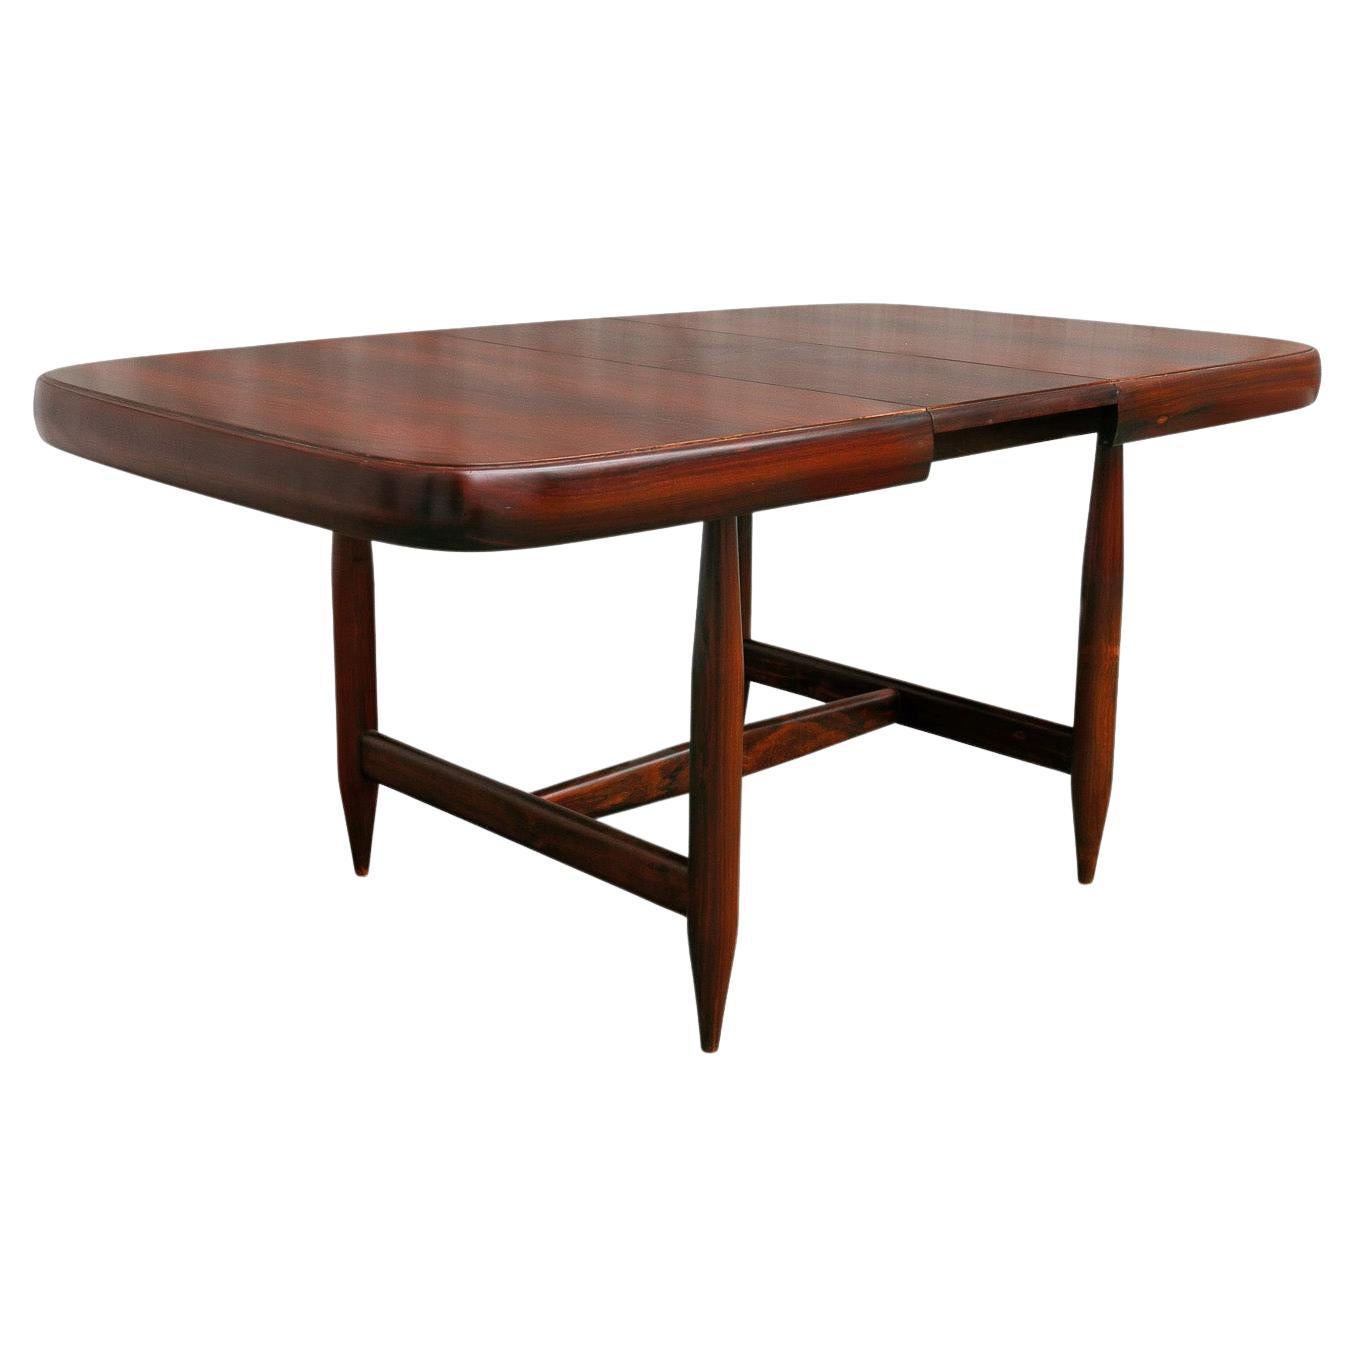 Midcentury Expandable Dining Table in Hardwood by Sergio Rodrigues, Brazil